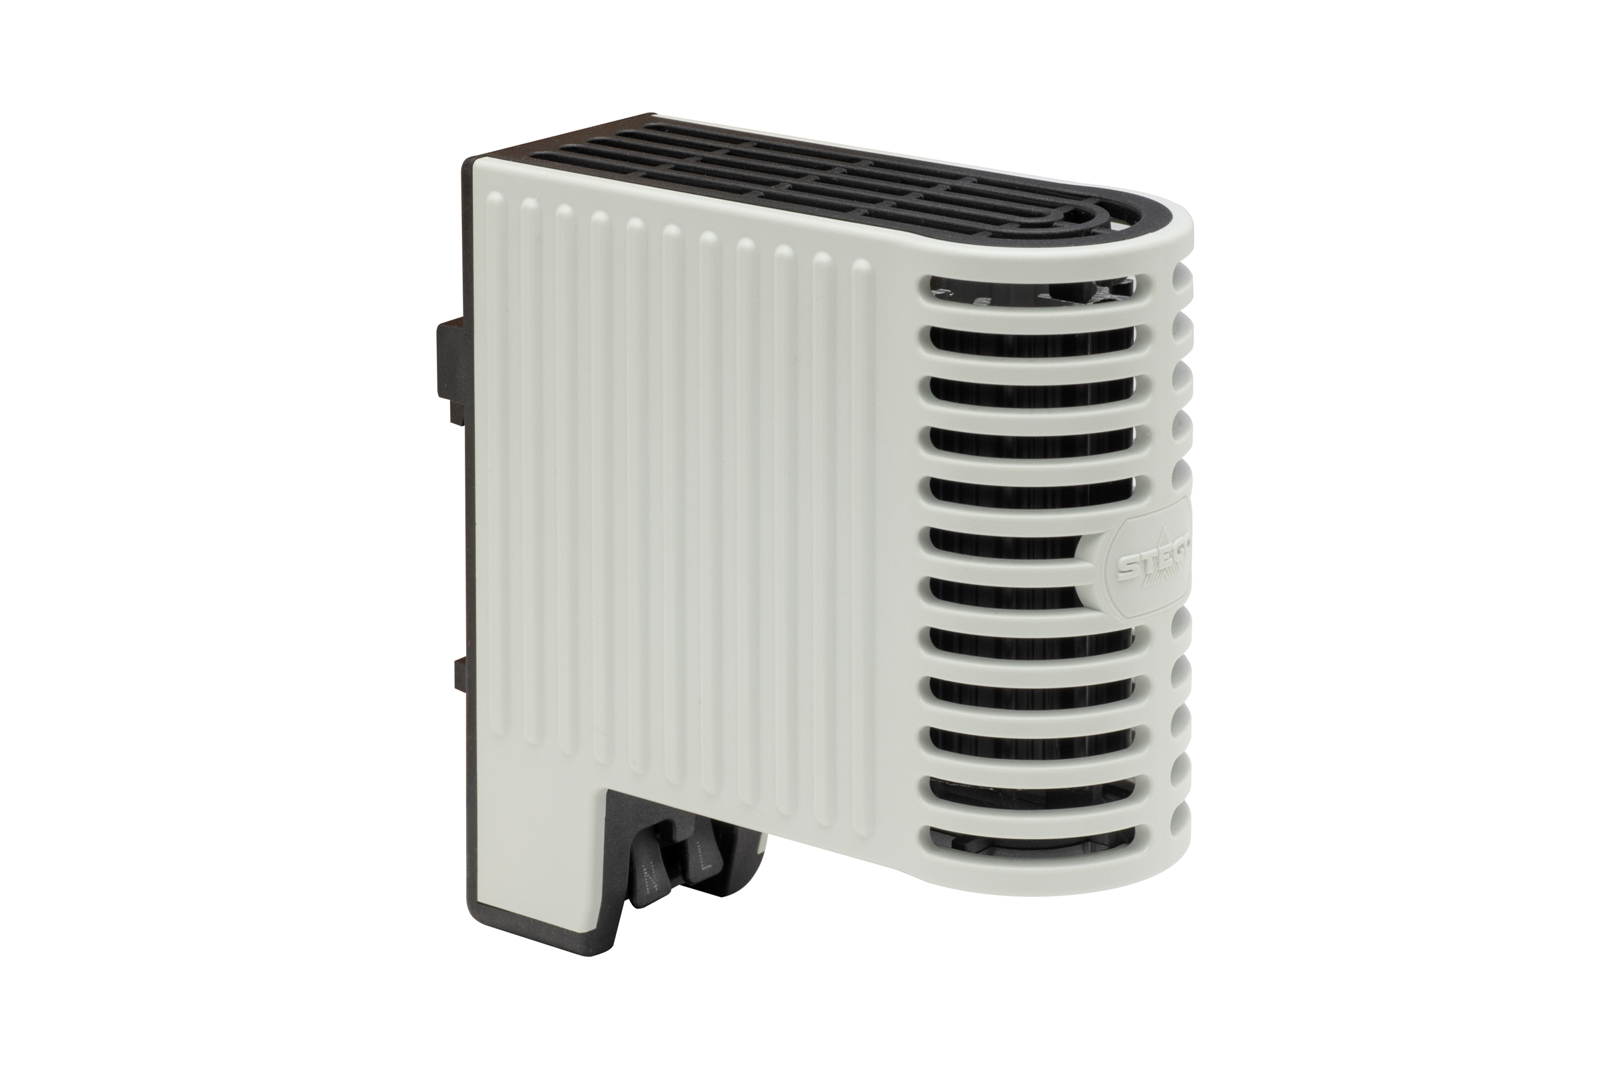 The touch-safe LTS 064 loop enclosure heater has an output of 20-40W